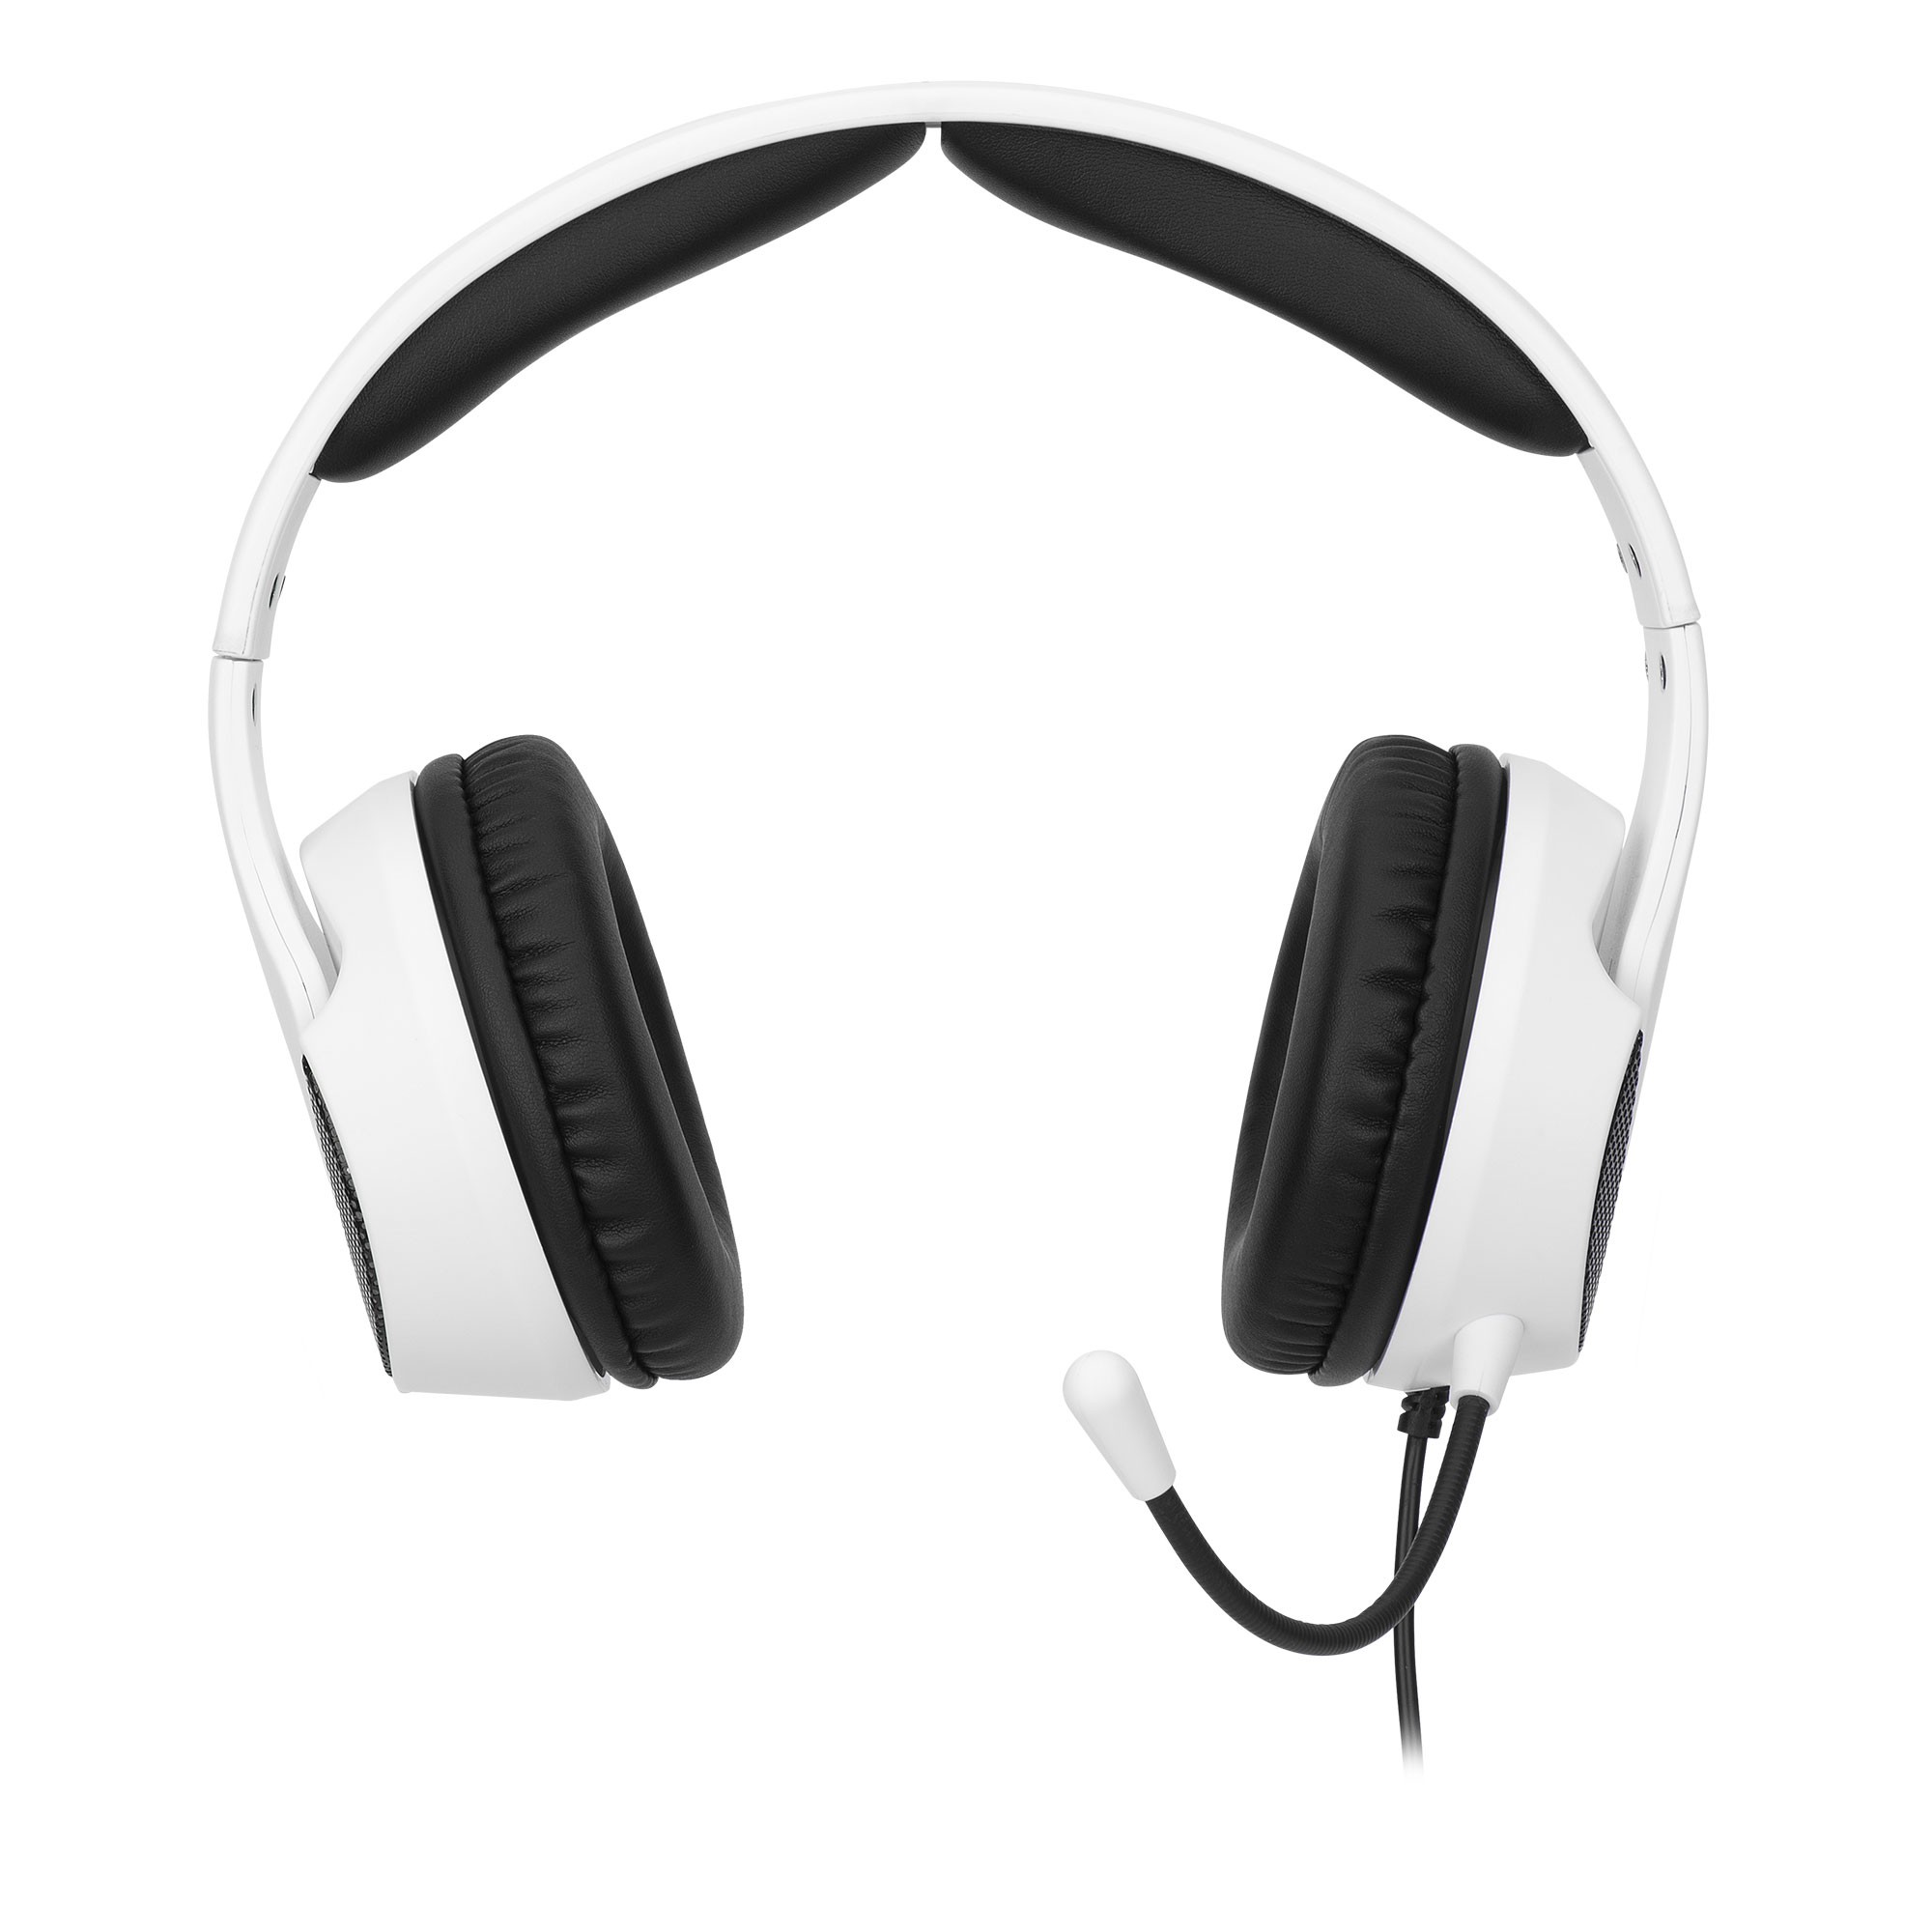 Autre accessoire gaming Just For Games Station Gaming Stealth Ultimate avec  Casque pour PS5 Blanc